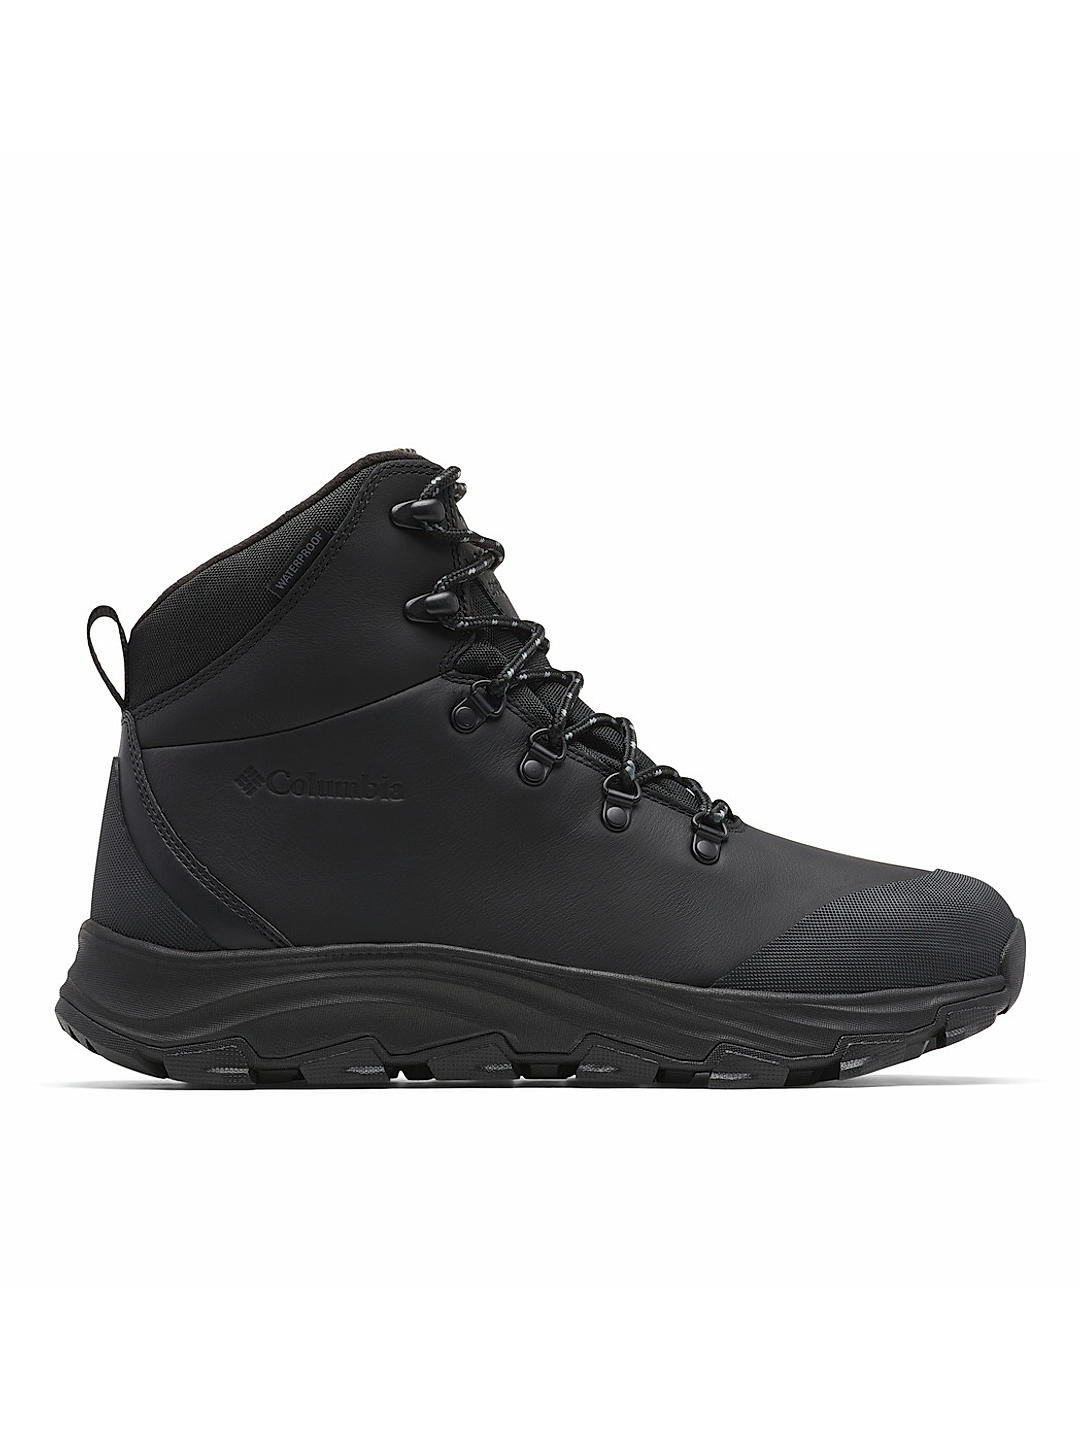 Buy Expeditionist Boot for Men Online at Columbia Sportswear | 488150